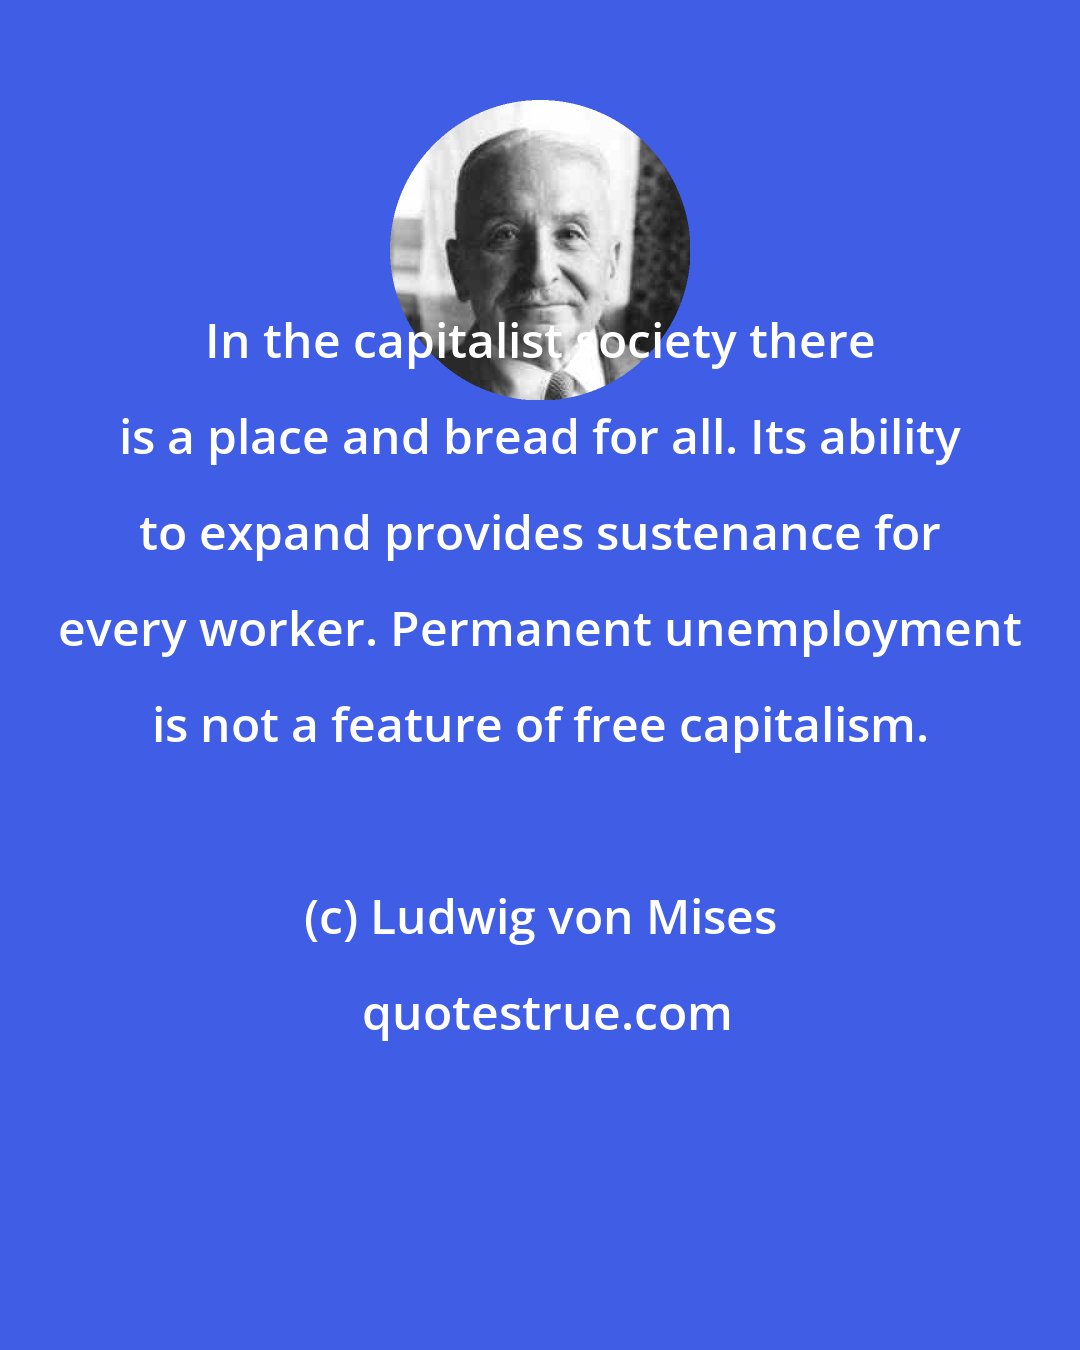 Ludwig von Mises: In the capitalist society there is a place and bread for all. Its ability to expand provides sustenance for every worker. Permanent unemployment is not a feature of free capitalism.